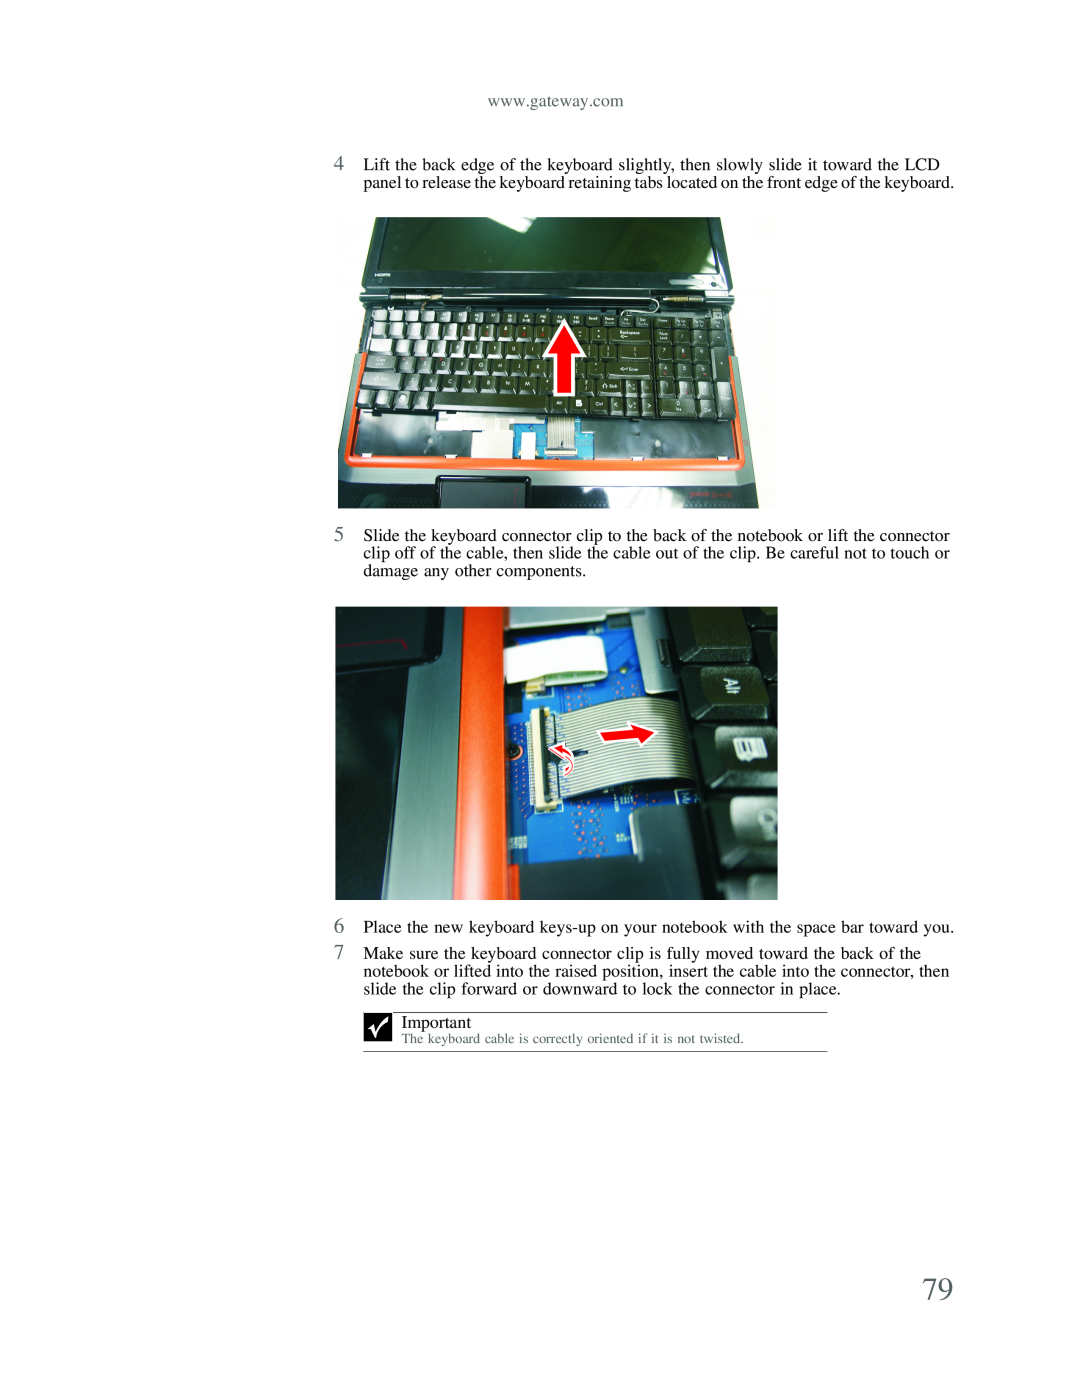 Gateway p-79 manual The keyboard cable is correctly oriented if it is not twisted 